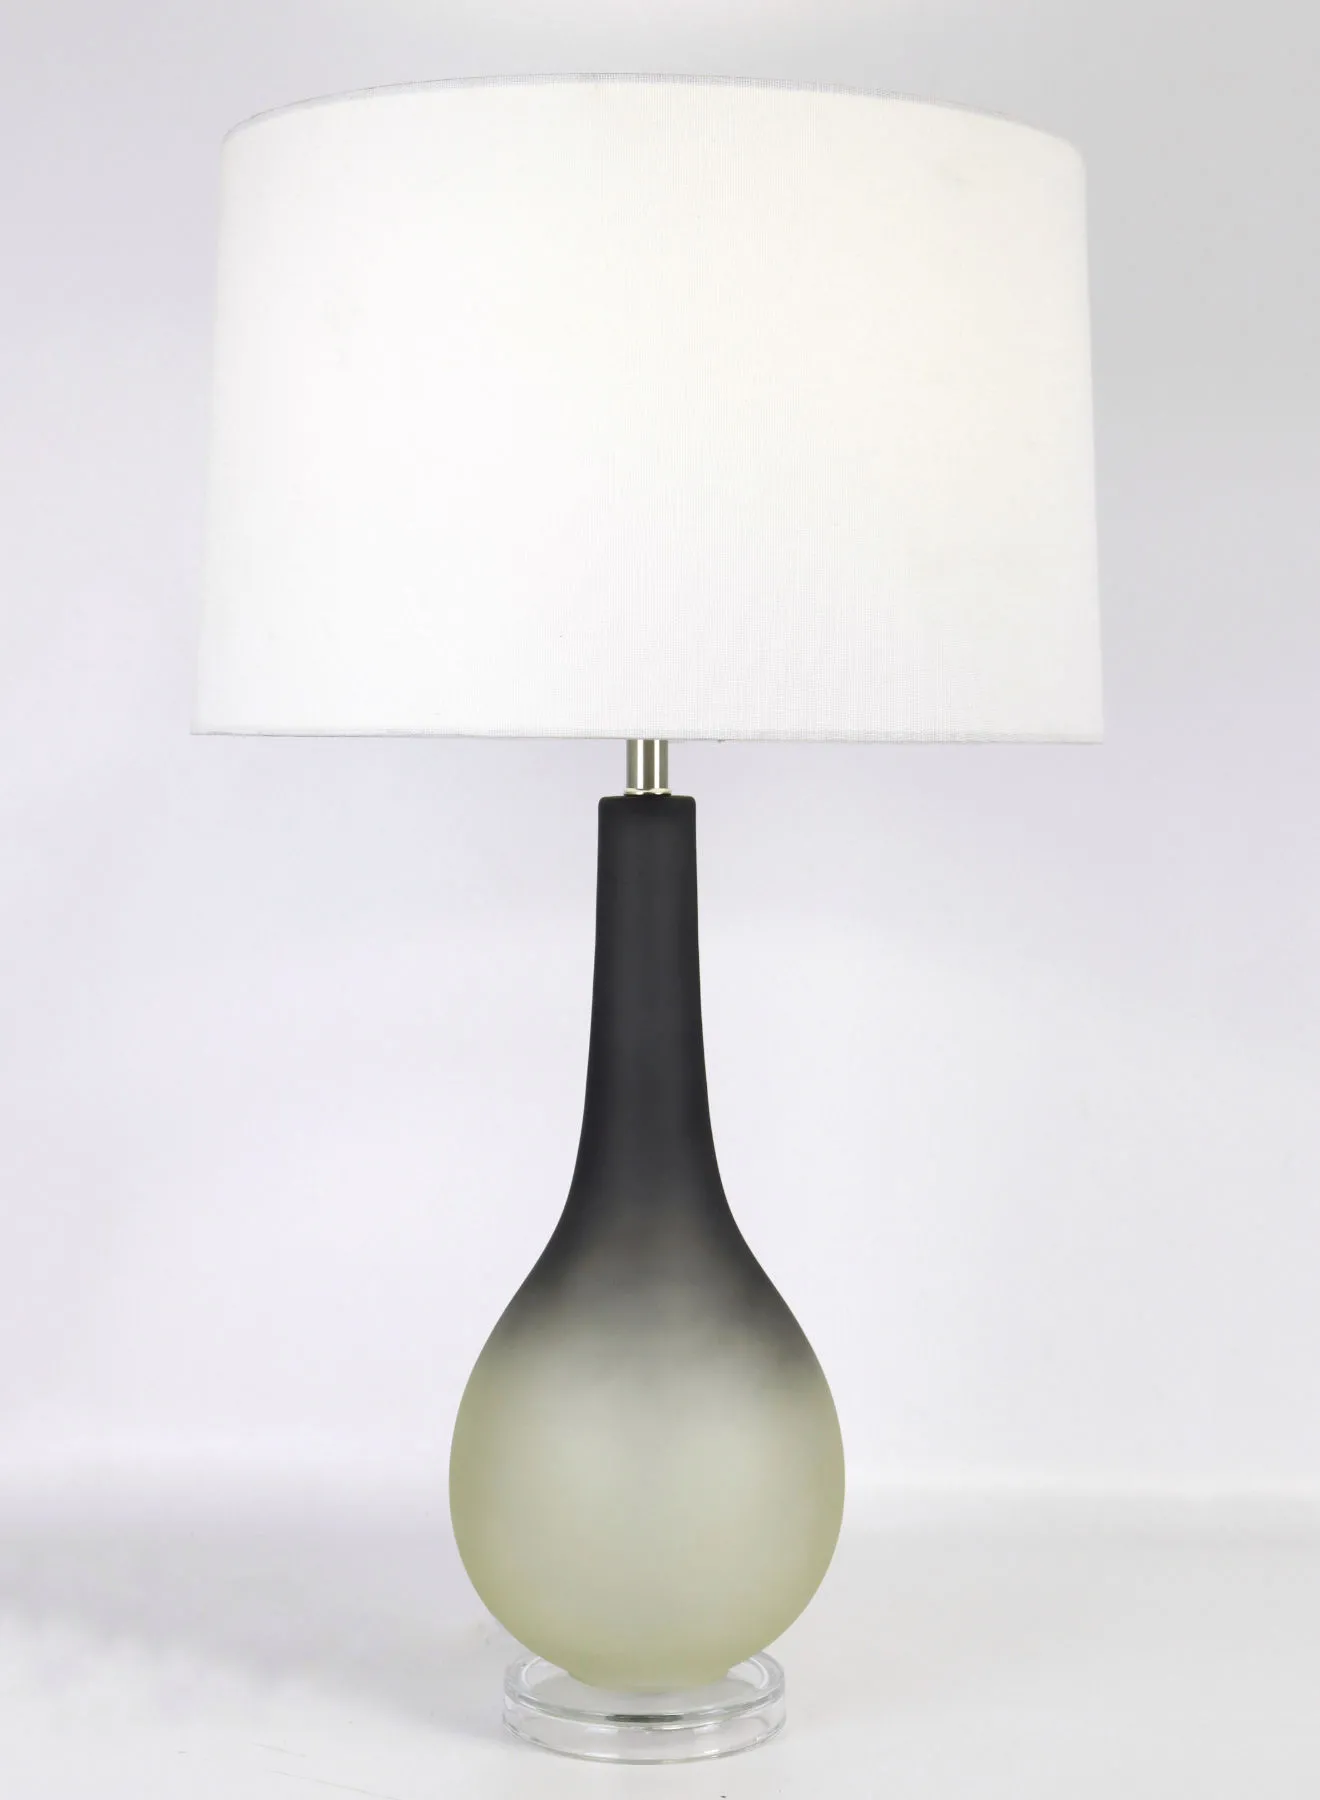 ebb & flow Modern Design Glass Table Lamp Unique Luxury Quality Material for the Perfect Stylish Home RSN71032 Smoke 16 x 27.5